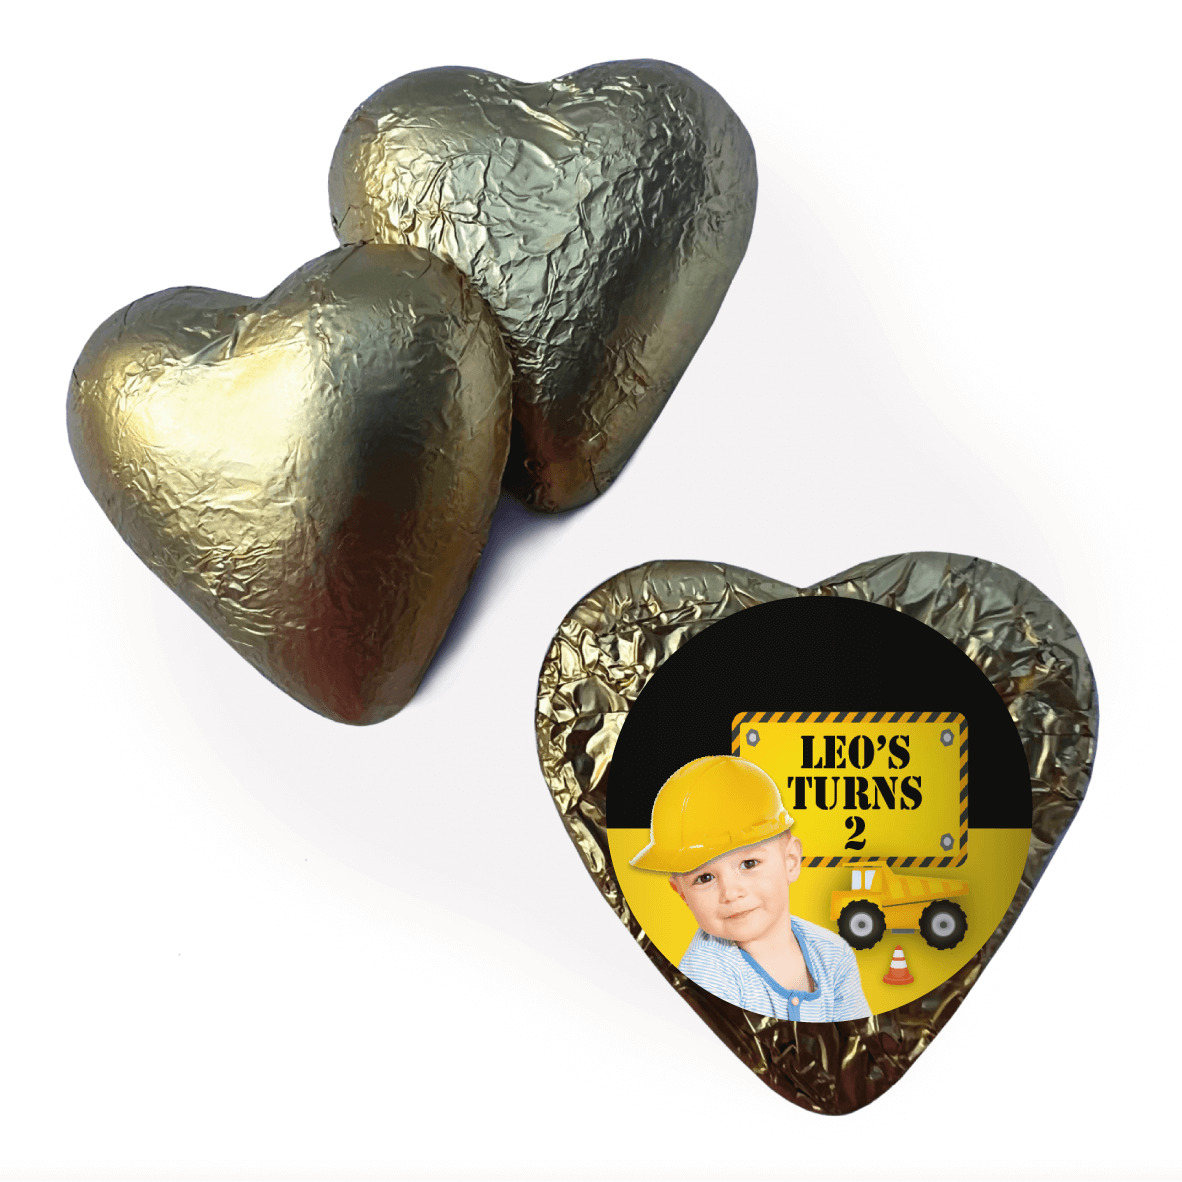 Shop for Construction Party Personalised Gold Foil Heart with Photo - Australia